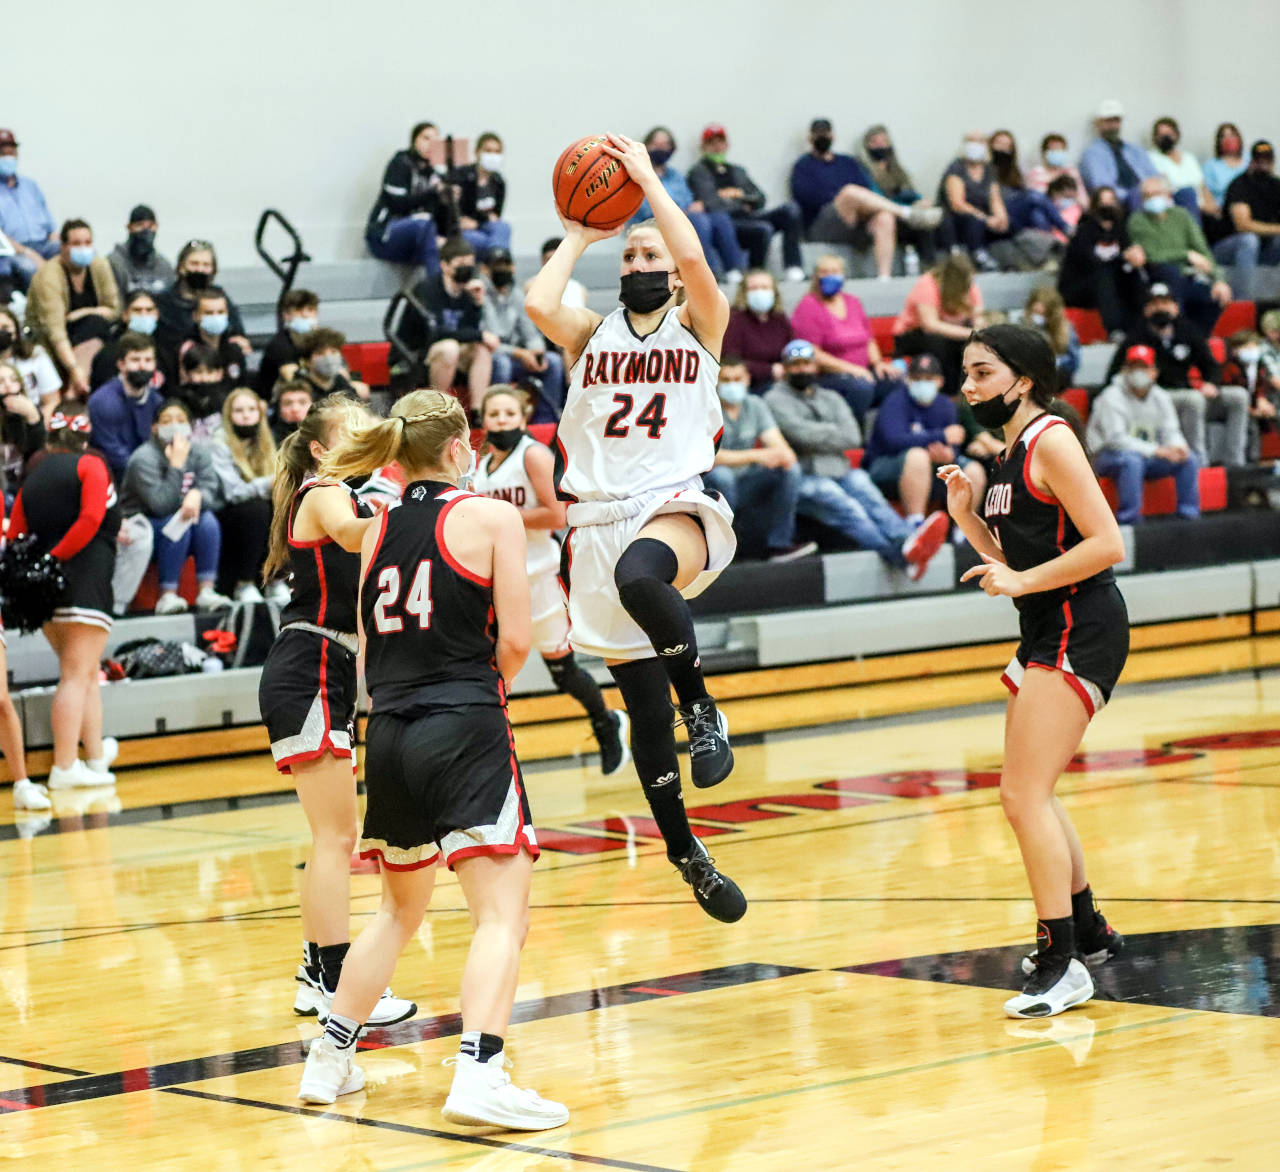 PHOTO BY LARRY BALE Raymond’s Karsyn Freeman shoots during the Seagulls’ 42-38 loss to Toledo in the 2B District 4 semifinals on Tuesday in Raymond.